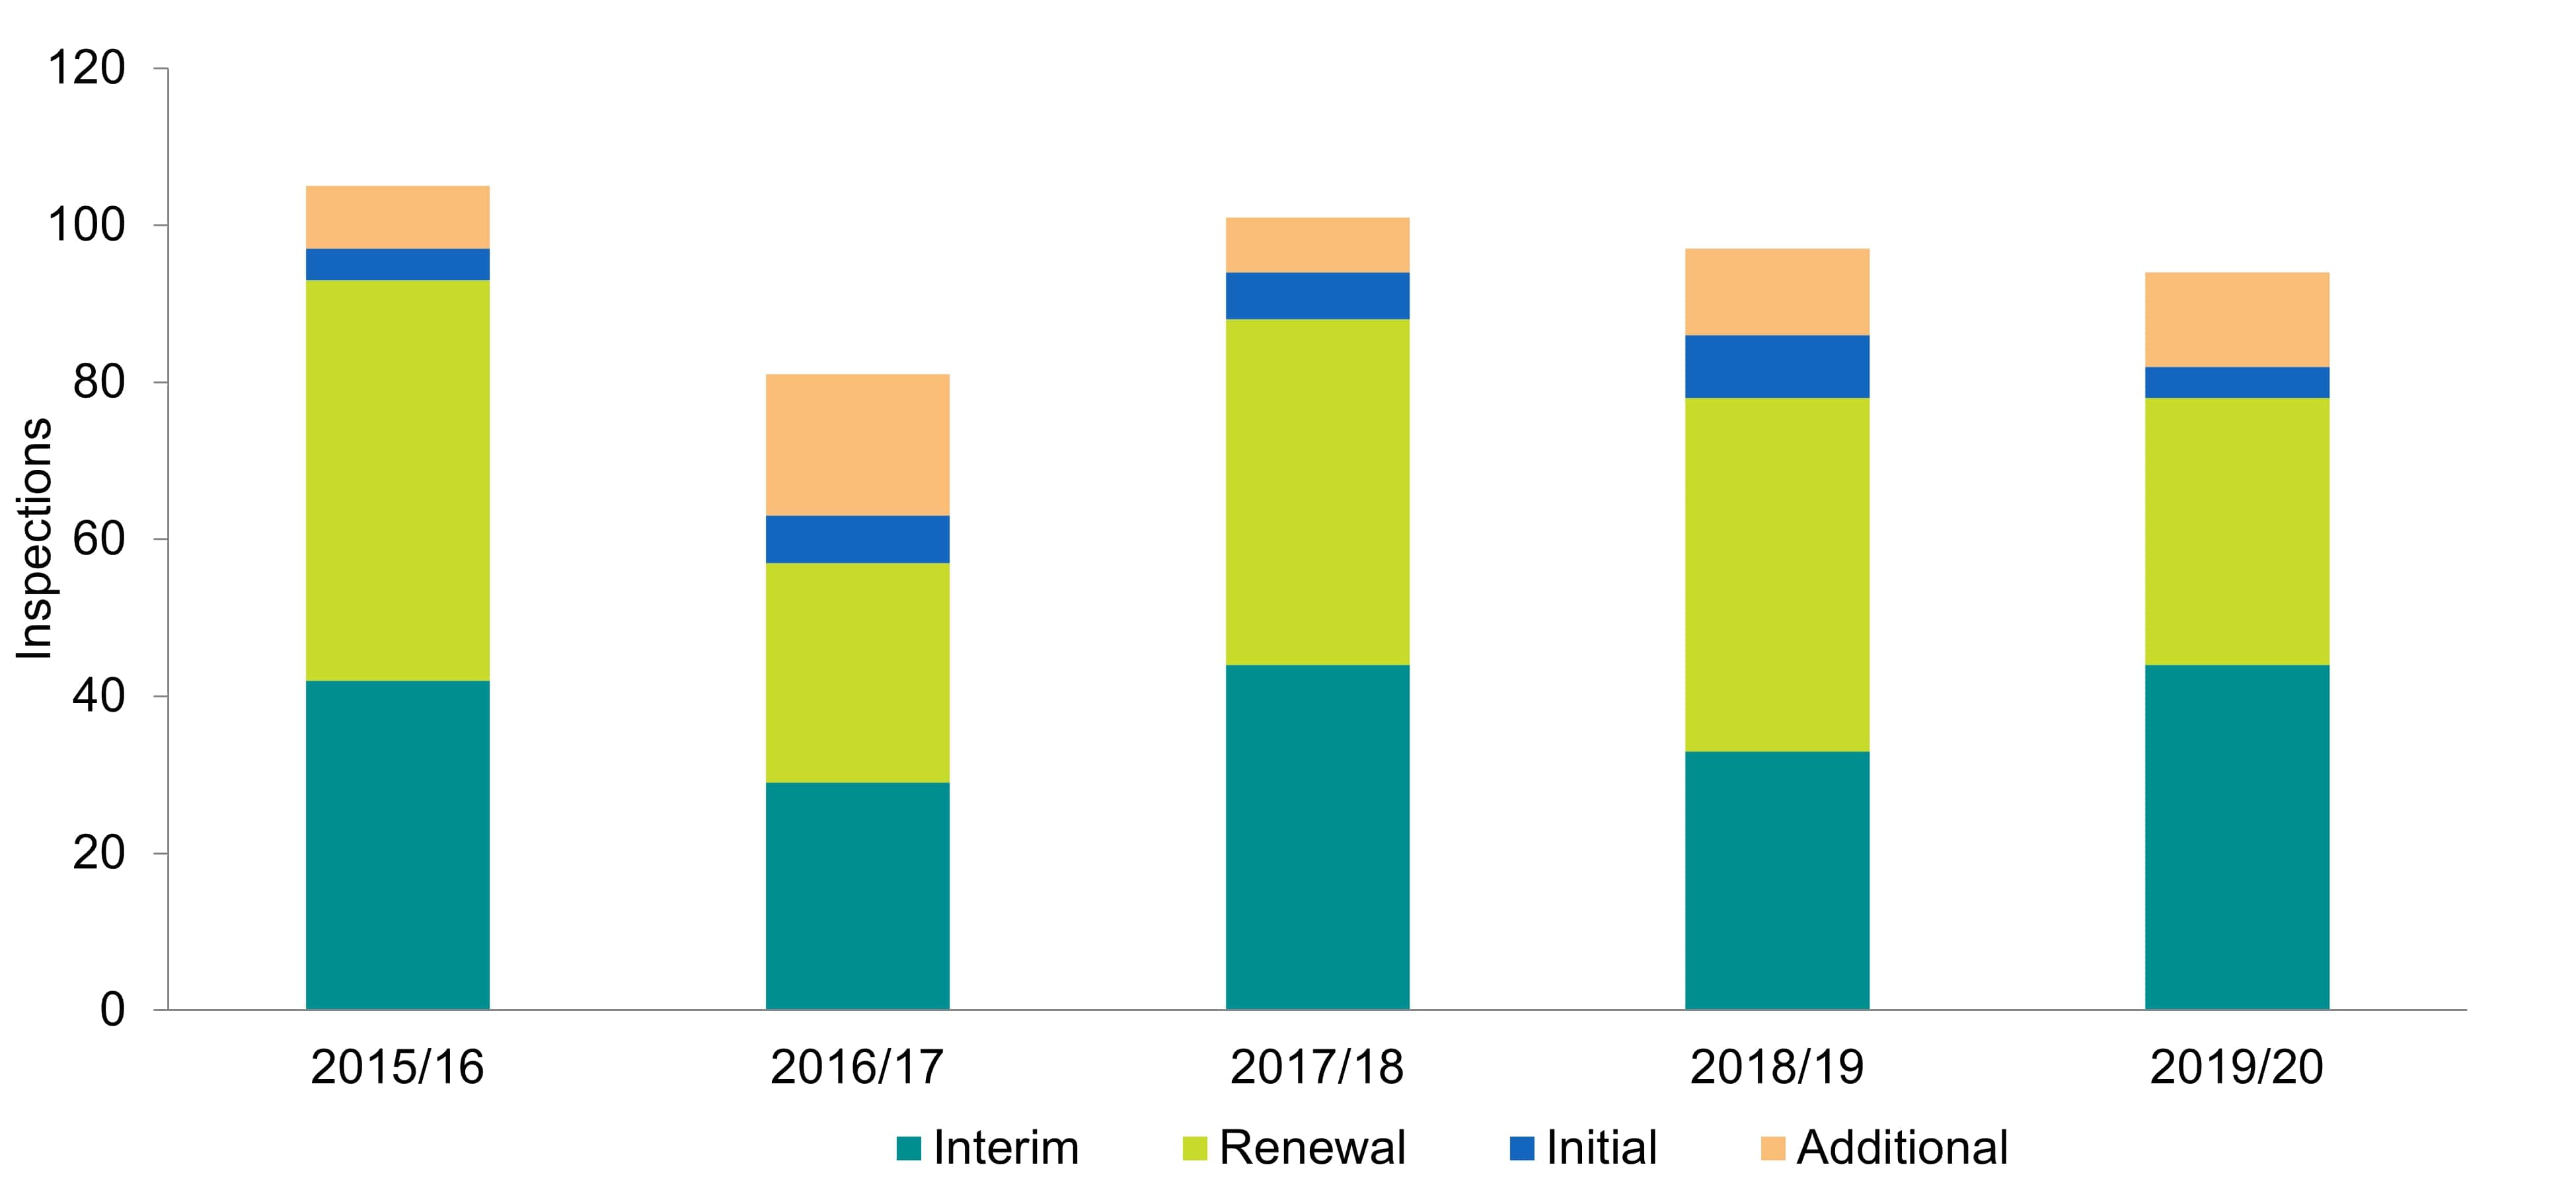 [1. Label] Number of inspections by type, 2015/16 – 2019/20. [2. Construction] This bar chart shows the number of inspections by type (interim, renewal, initial and additional) by year for 2015/16, 2016/17, 2017/18, 2018/19, and 2019/20 [3. Summary] There were 94 inspections carried out in 2019/20 and just under half were interim inspections [4. Data] The figures are 2015/16, 4 initial, 42 interim, 51 renewal and 8 additional; 2016/17, 6 initial, 29 interim, 28 renewal and 18 additional; 2017/18, 6 initial, 44 interim, 44 renewal and 7 additional; 2018/19, 8 initial, 33 interim, 45 renewal and 11 additional; 2019/20, 4 initial, 44 interim, 34 renewal and 12 additional.